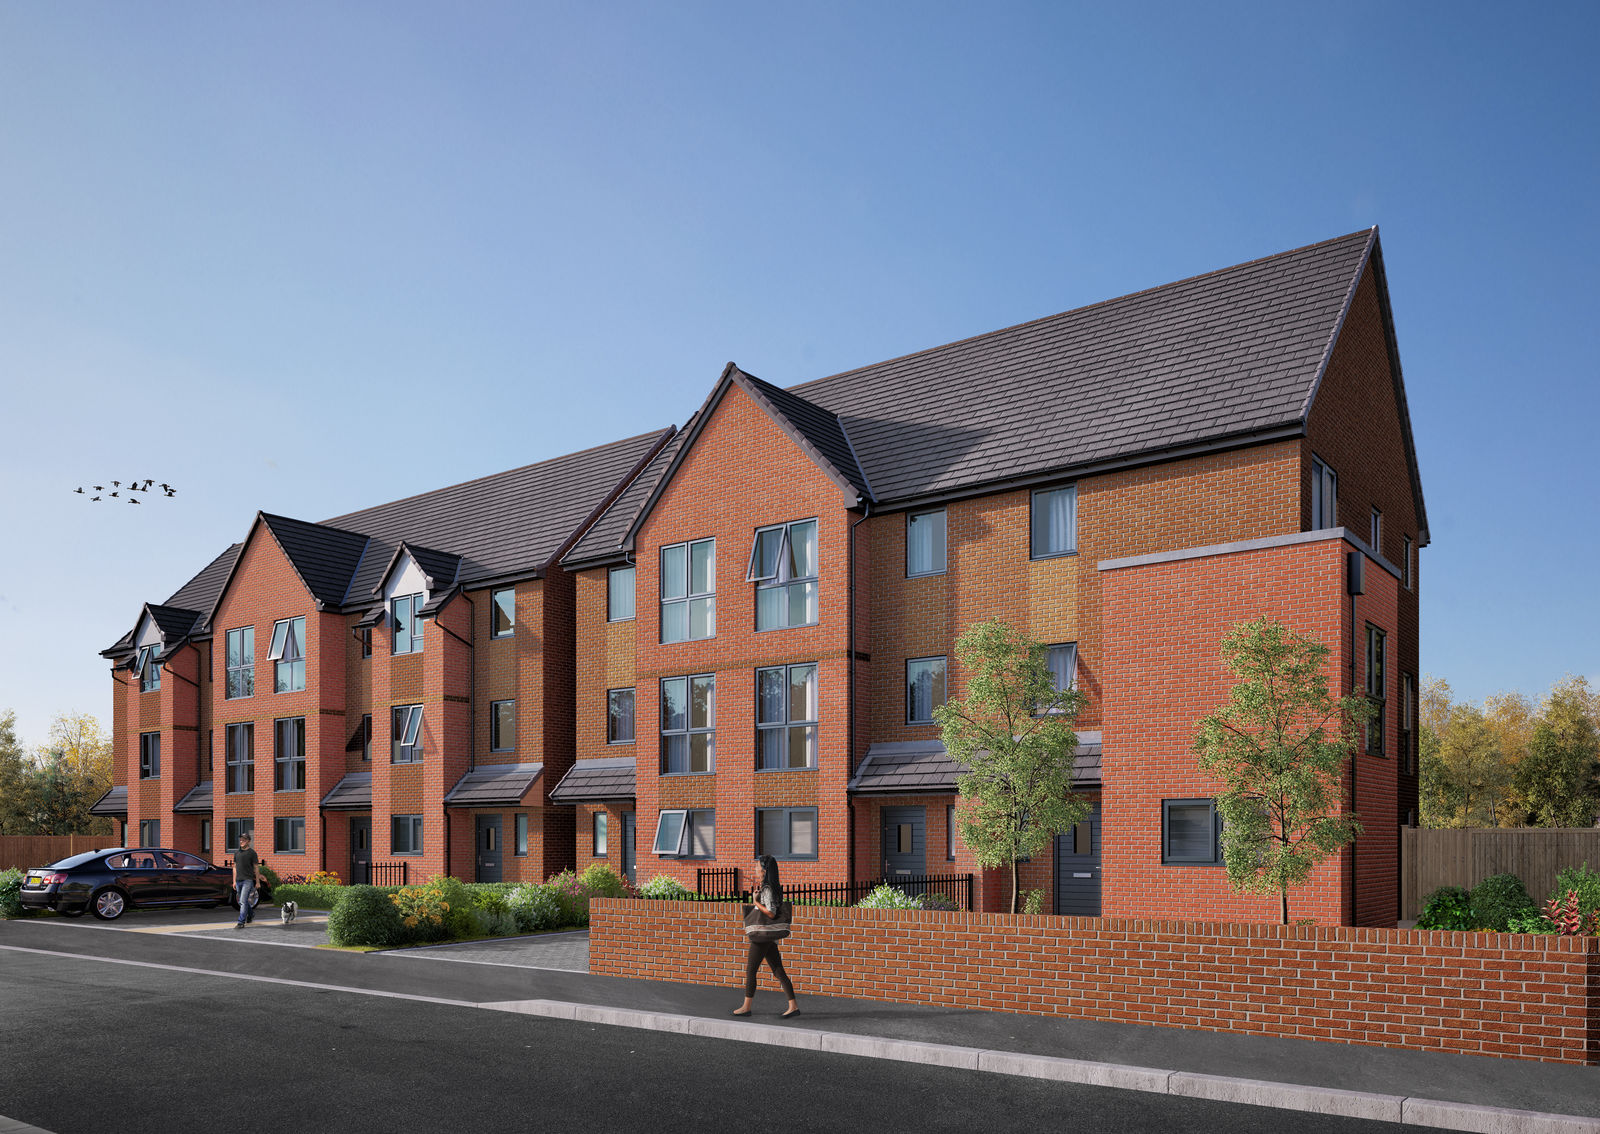 Laurus Homes announces two new developments in Walkden and Whalley Range